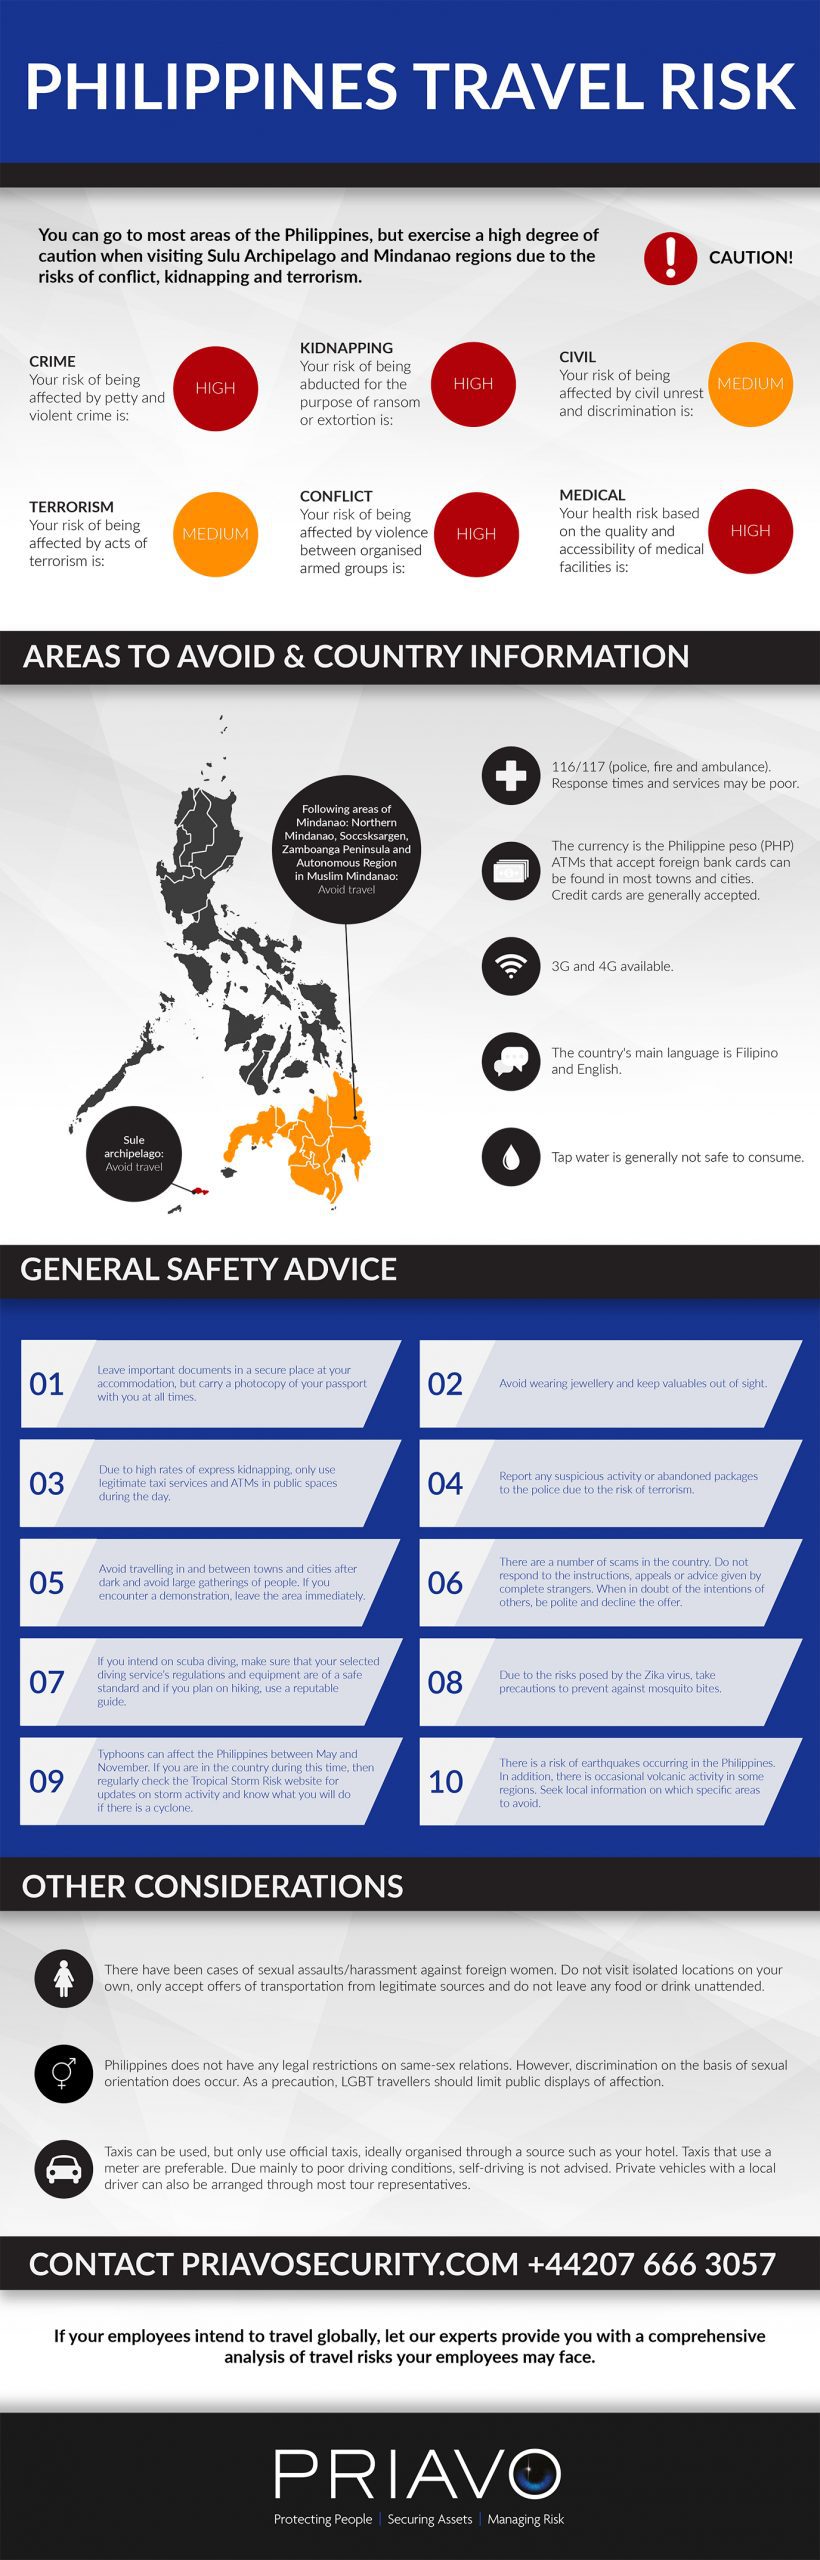 Travel Risk Report Philippines scaled